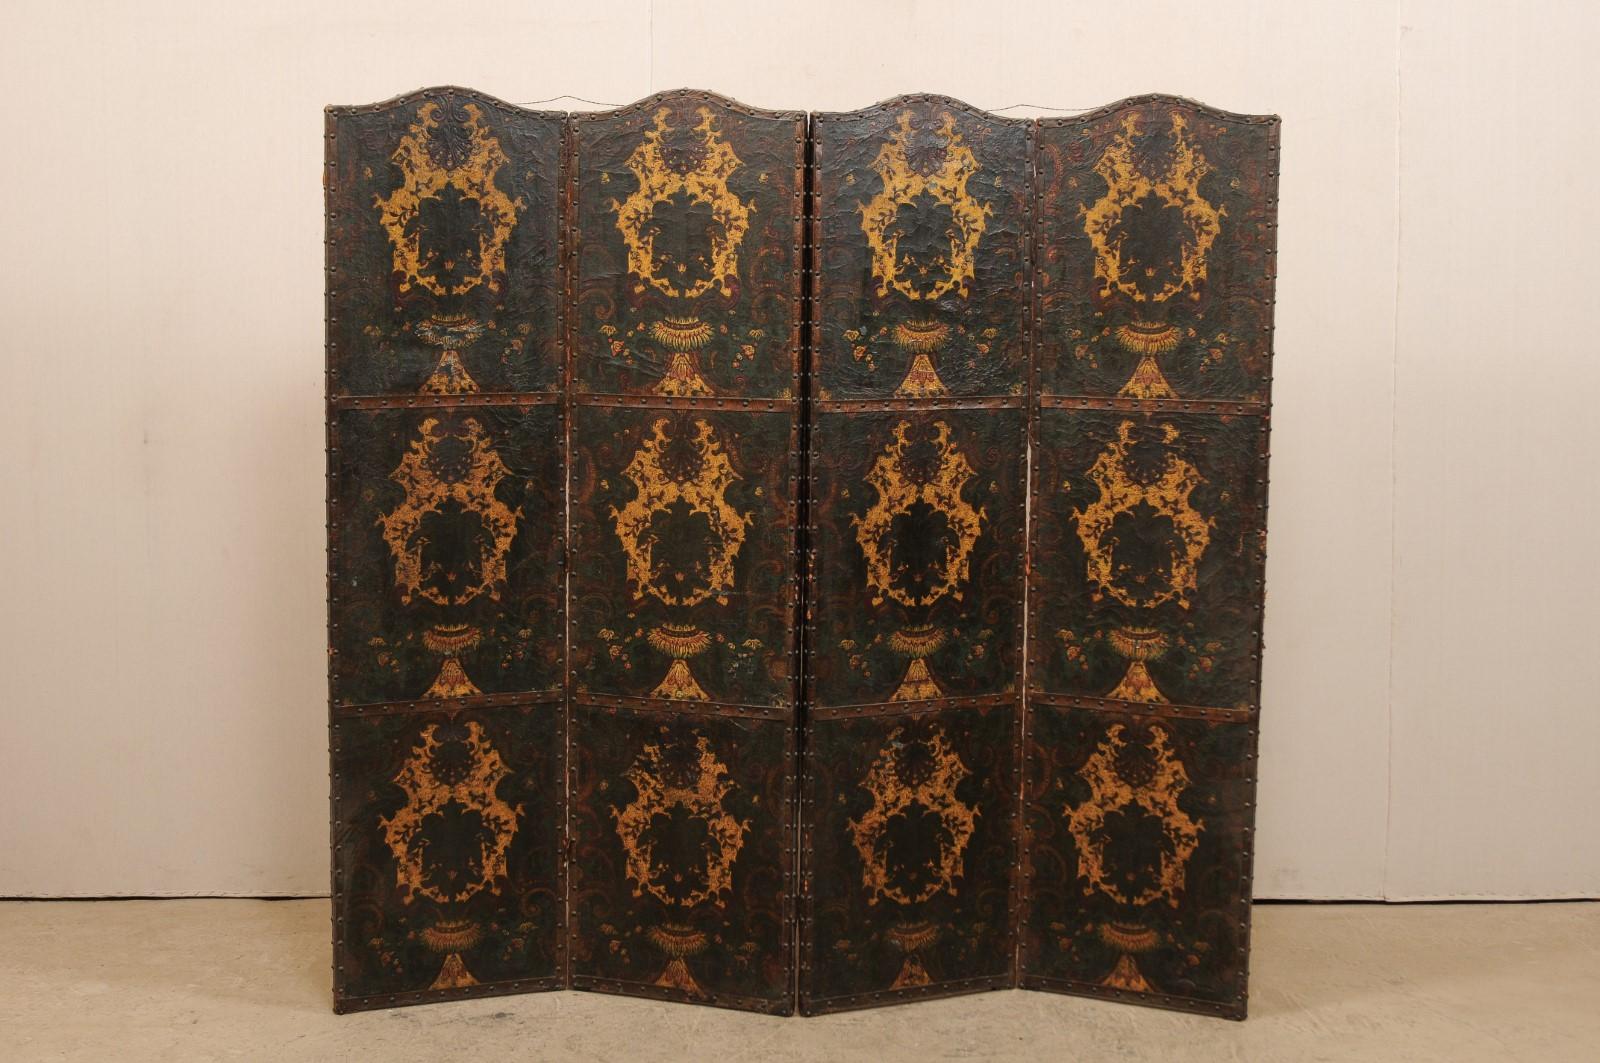 An Italian hand painted leather room divider from the 19th century. This antique accordion style folding screen from Italy features 4 connected panels, each with an arch-shaped top, whose front sides are adorn in leather with original hand painted